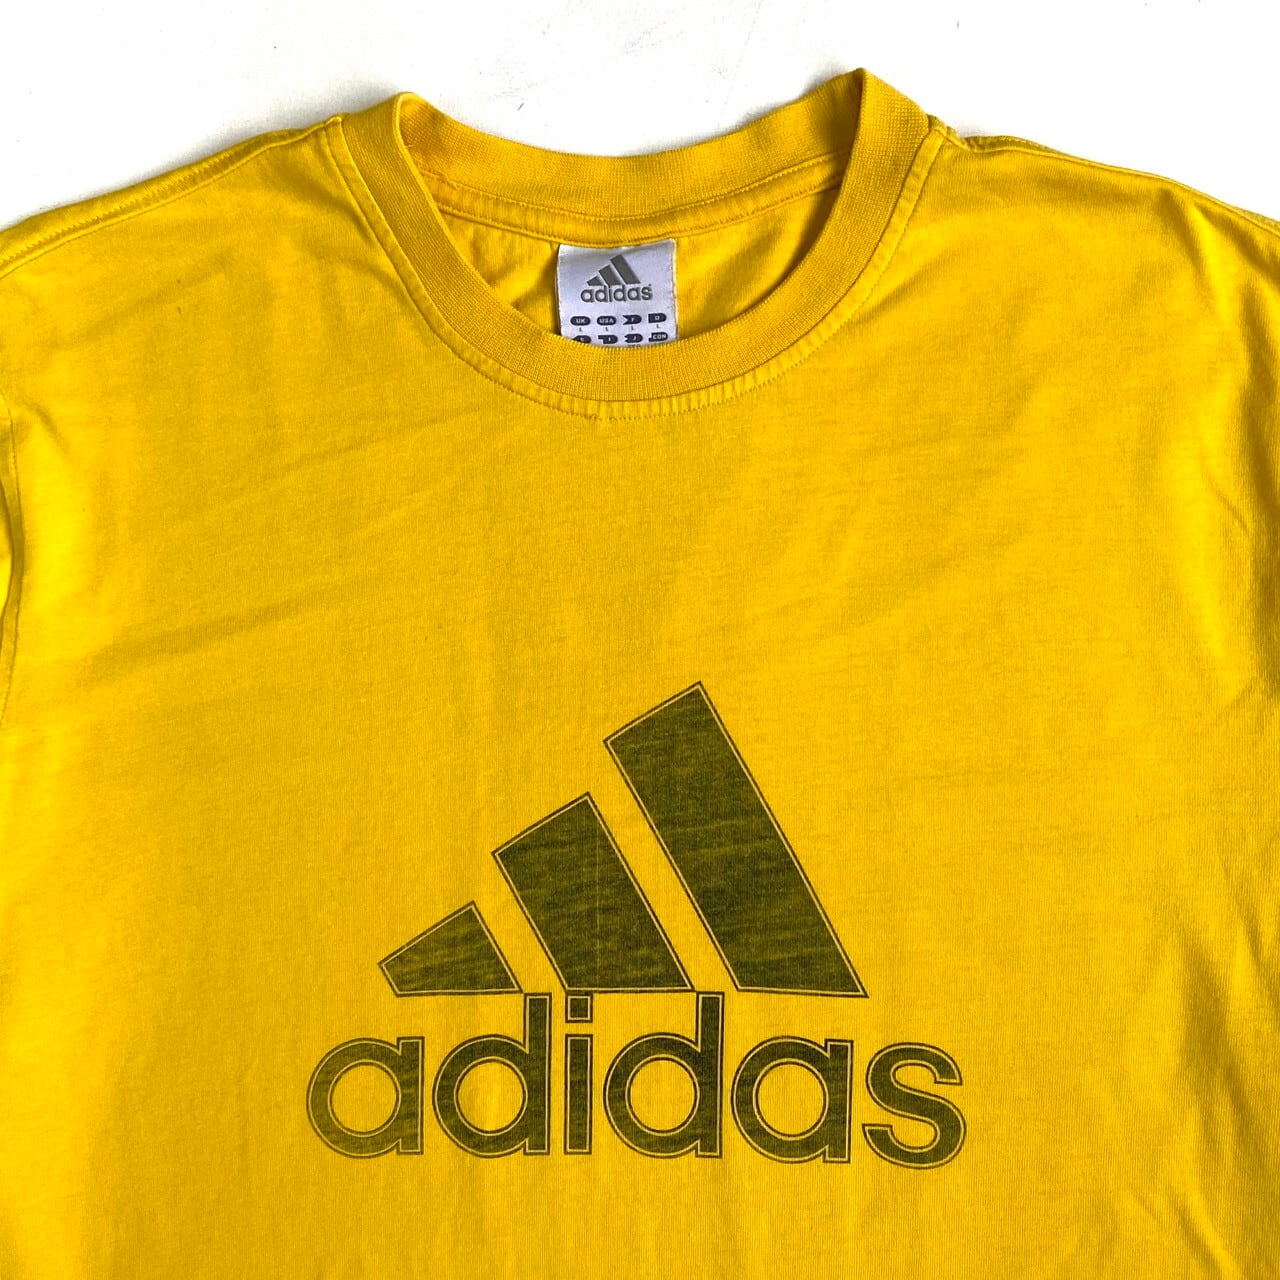 adidas アディダス ロゴ プリントTシャツ メンズL 古着 イエロー 黄色【Tシャツ】【CS2211-50】 | cave  古着屋【公式】古着通販サイト powered by BASE